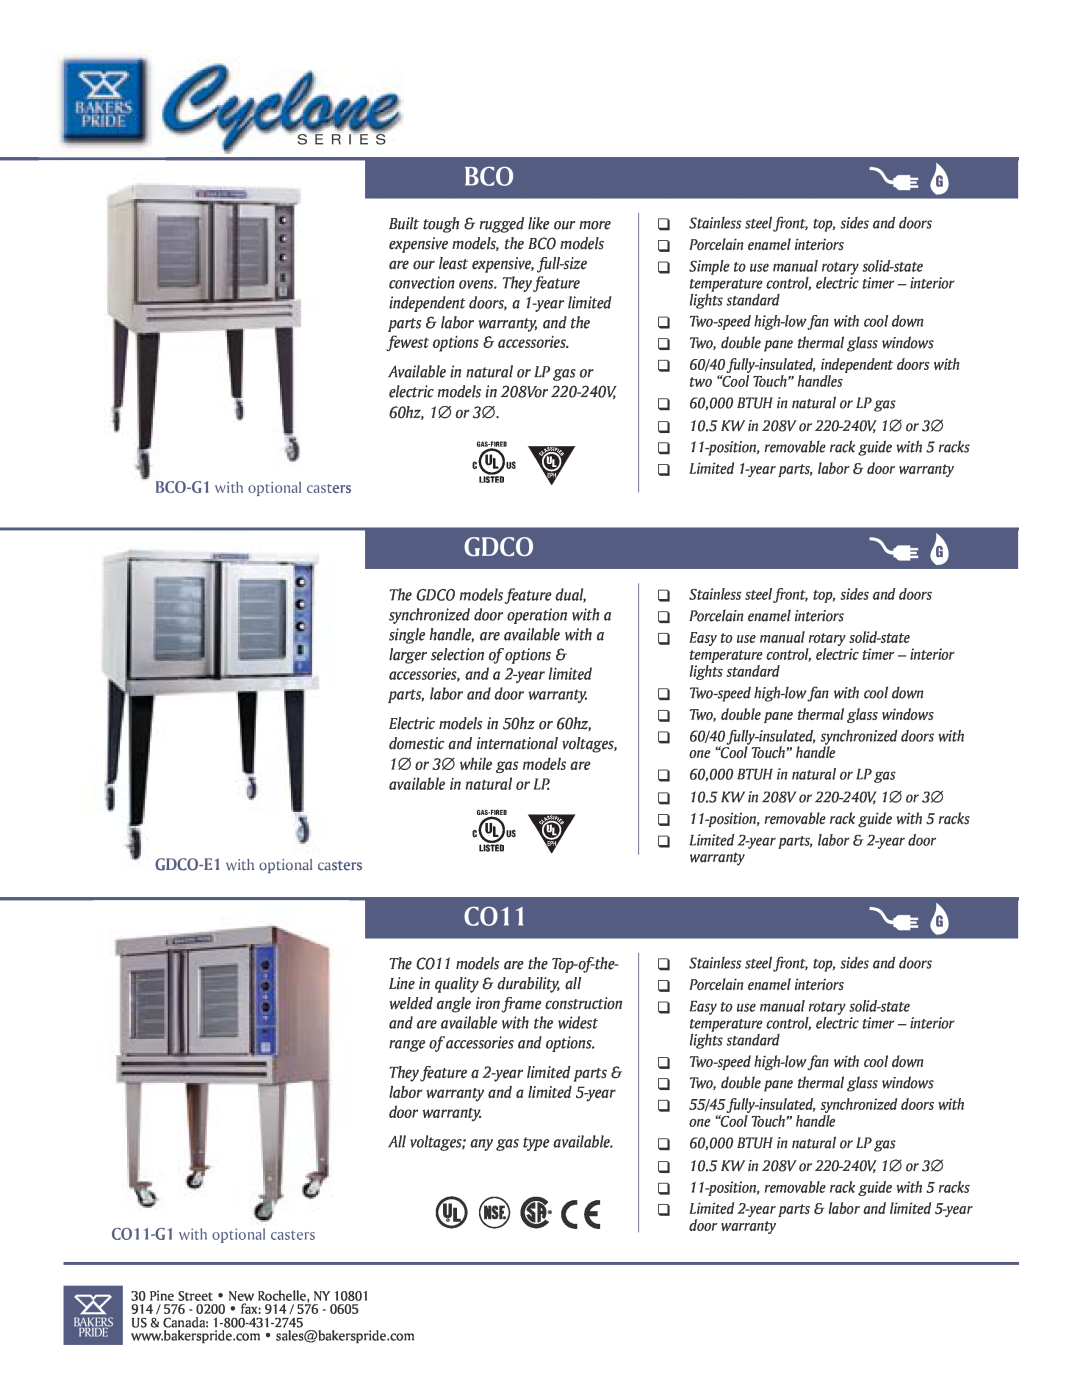 Bakers Pride Oven CO11 manual Gdco 